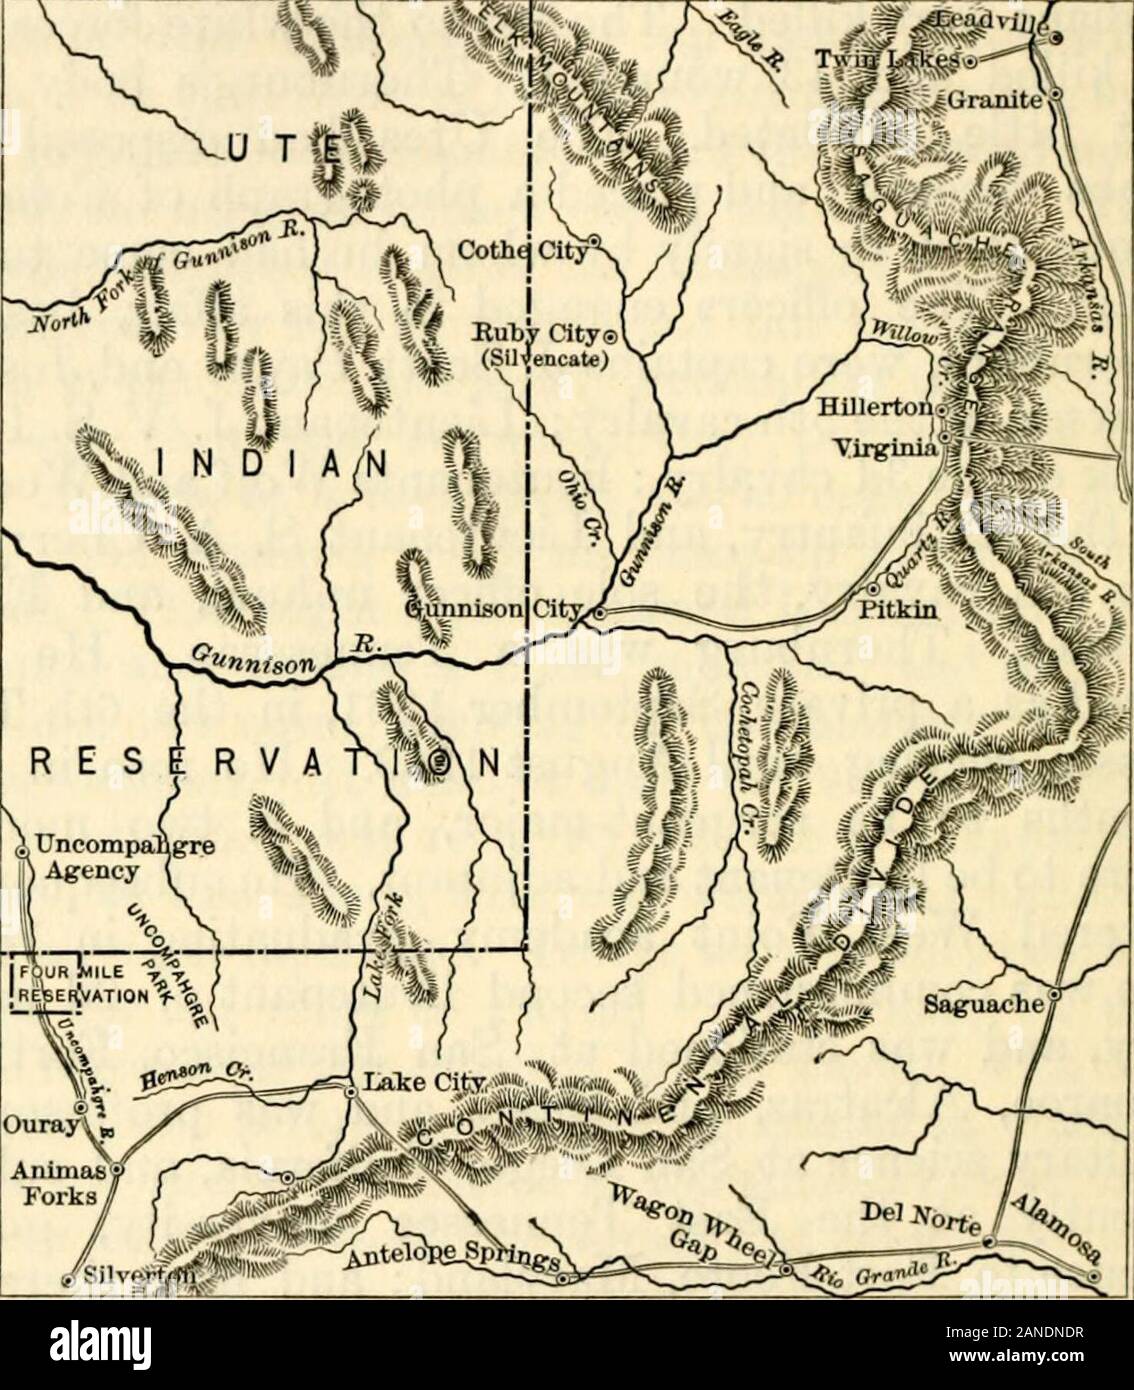 History of Nevada, Colorado, and Wyoming, 1540-1888 . oote, Maryland; and from there toSan Antonio, Texas; then to Fort Brown, and toOmaha. He became major of the 4th infantry atFort Fred. Steele. Merritt reached the agency onthe 11th, finding twelve dead and mutilated bodies. 8 Others not here named were likewise killed. The twelve were N. C.Meeker, E. W, Eskridge, his clerk, a lawyer by profession, and had been abanker; W. H. Post, assistant agent and farmer; E. Price, blacksmith; FrankDresser, Harry Dresser, Frederick Shepard, George Eaton, V. H. Thomp-son, E. L. Mansfield, Carl Goldstein, Stock Photo